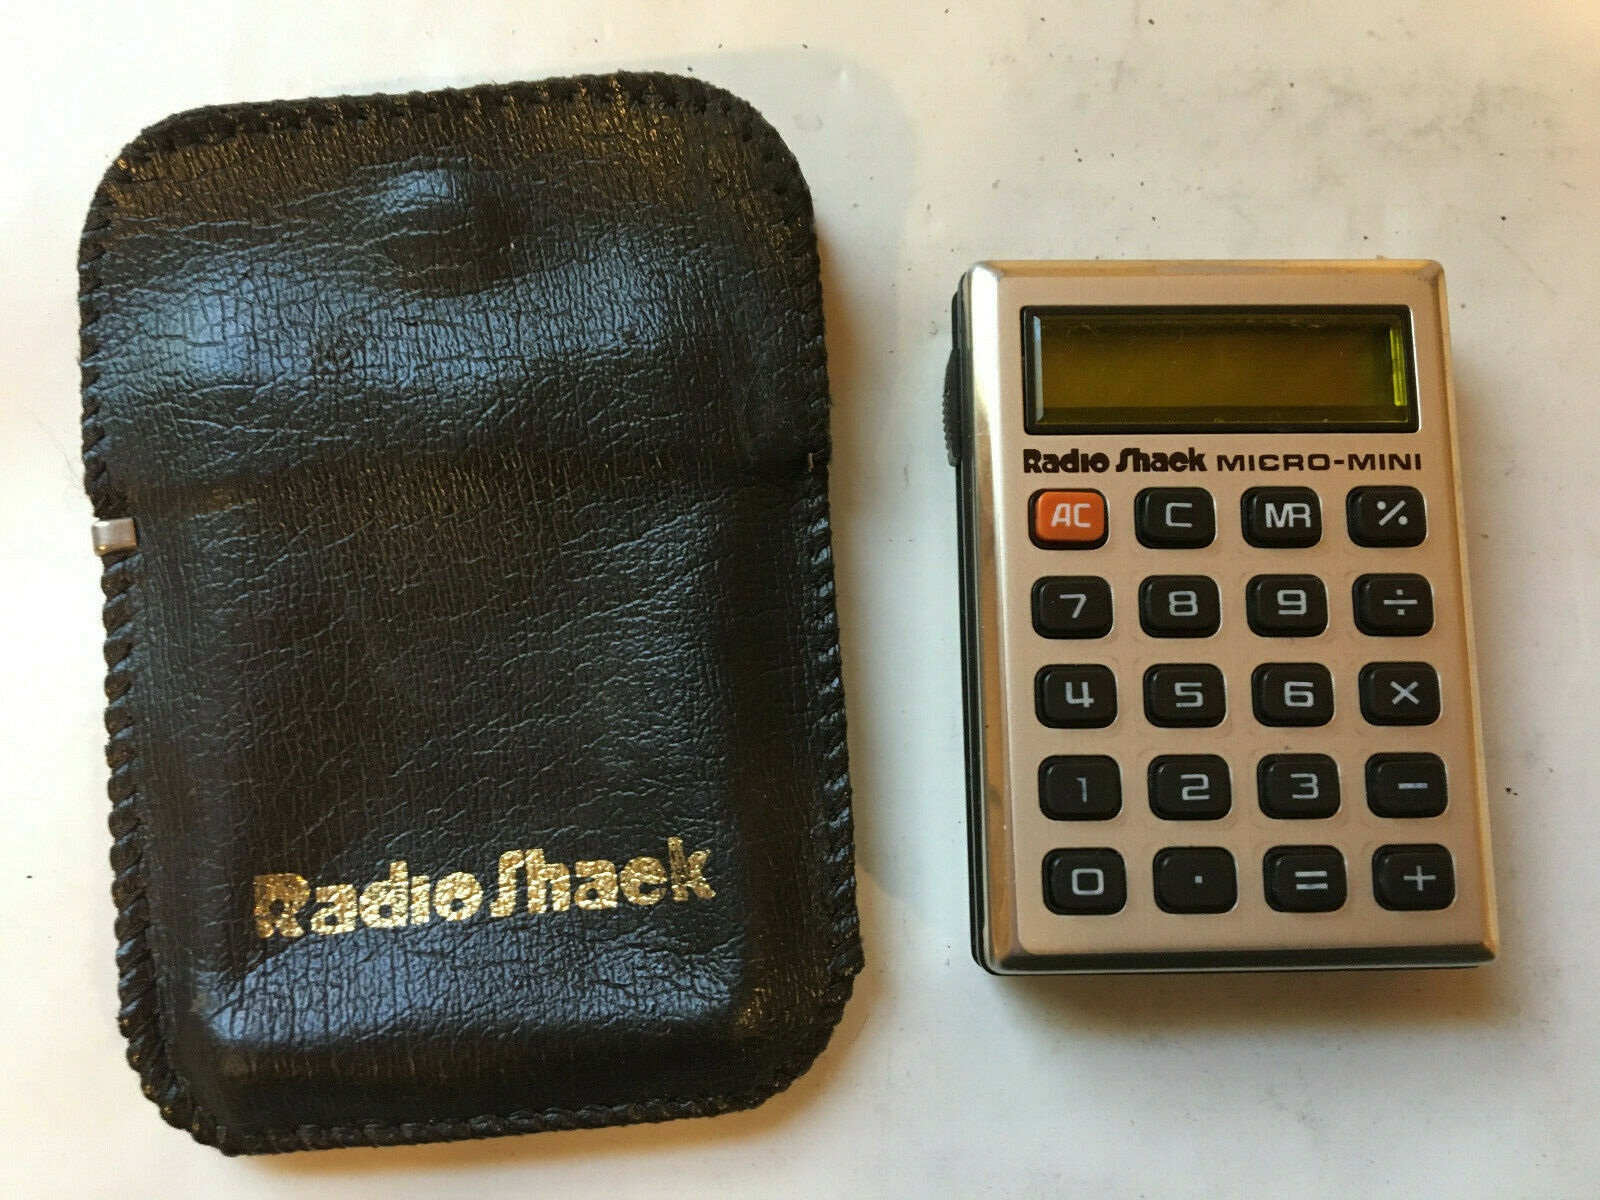 Radio Shack Micro Mini Calculator Ec-222 W Leather Pouch Missing Battery Cover